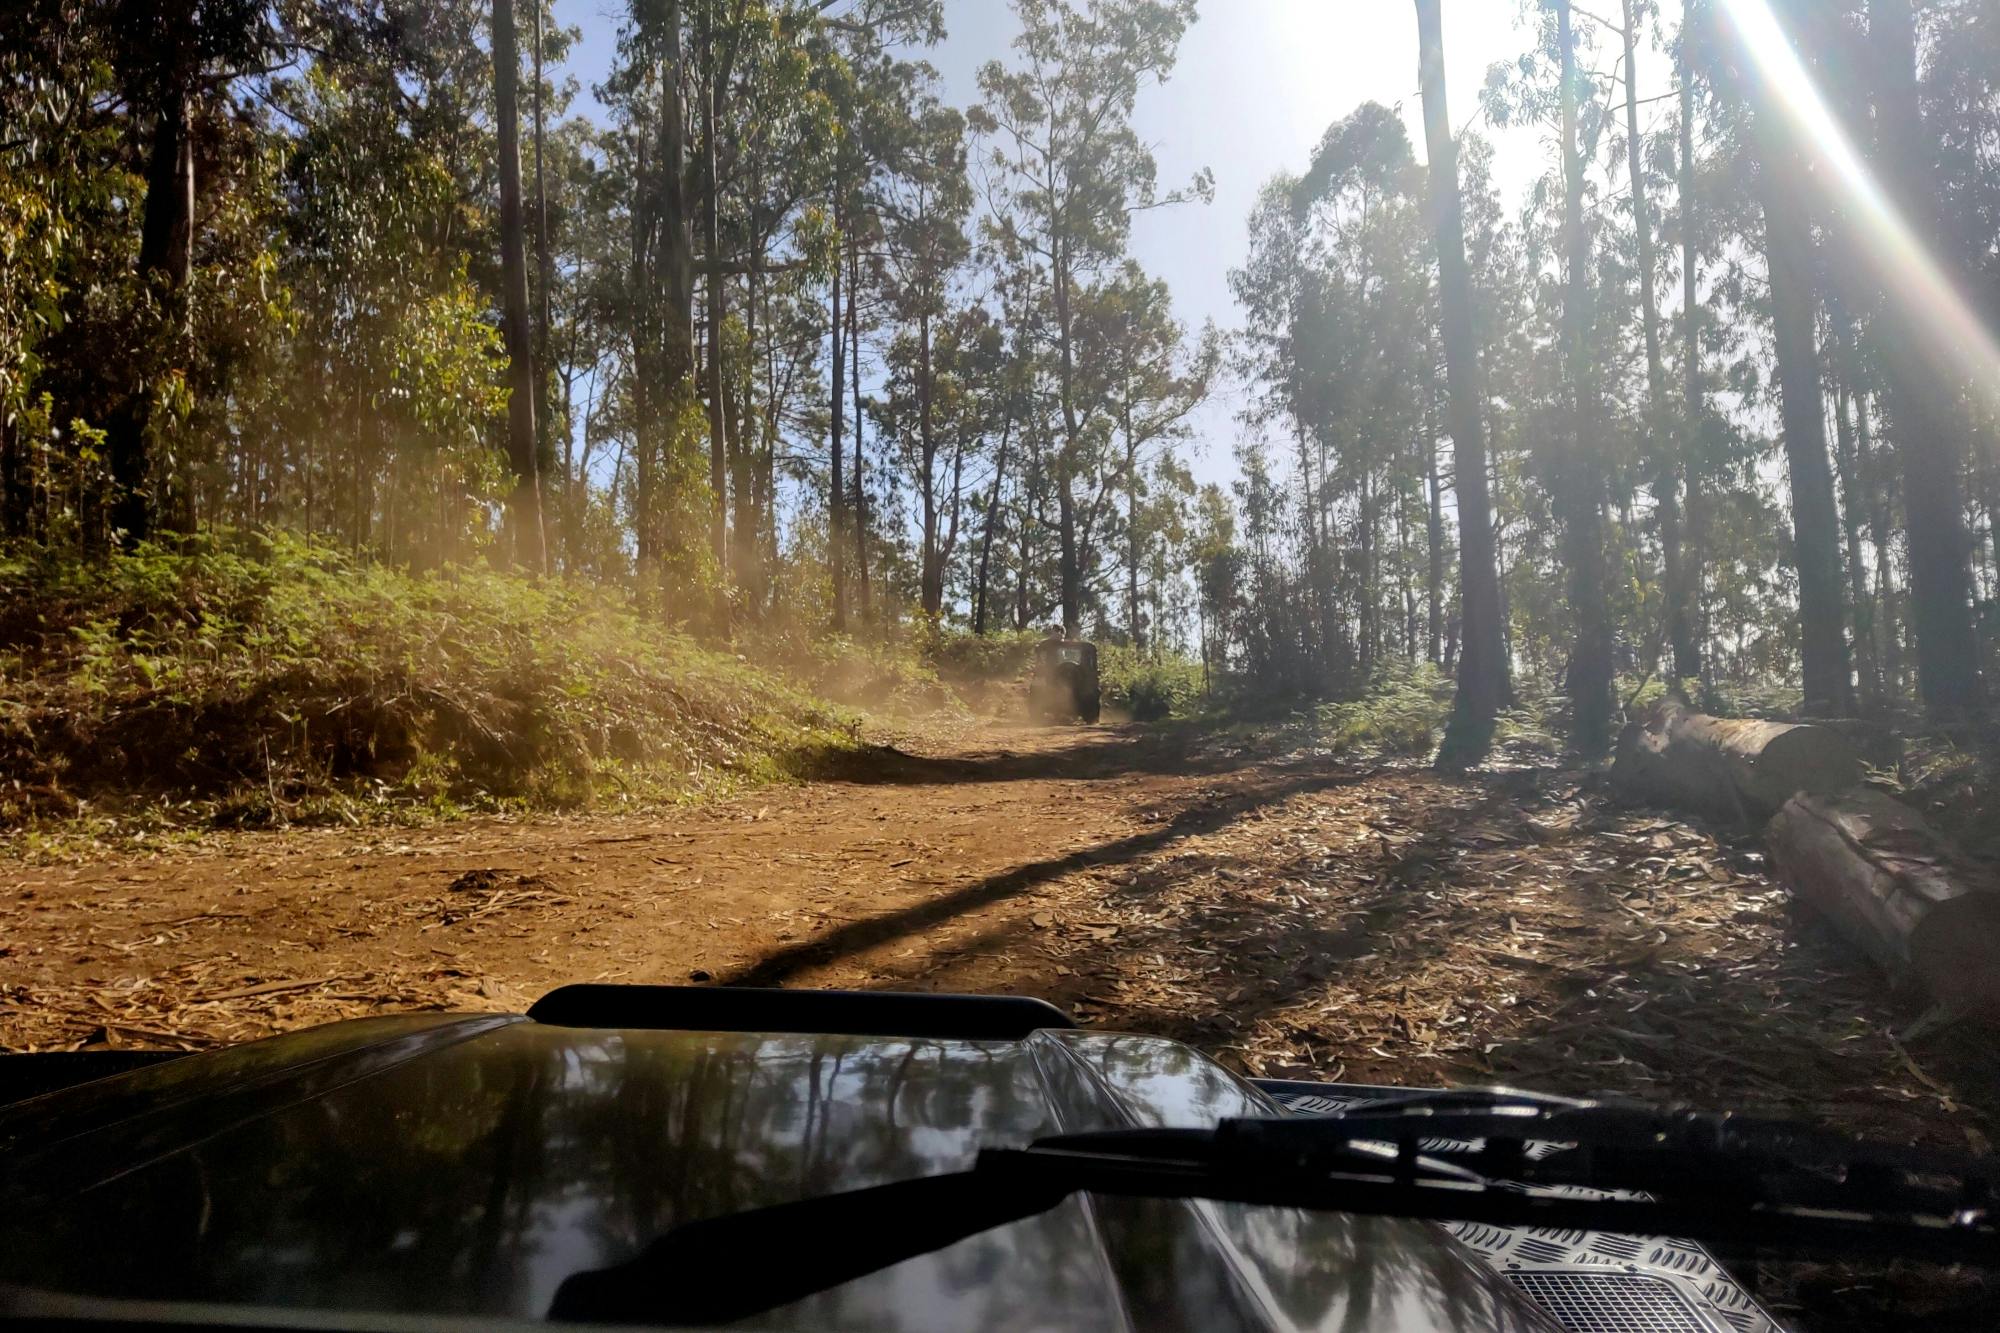 Northwest Madeira 4x4 Tour with Laurisilva Forest and Lunch